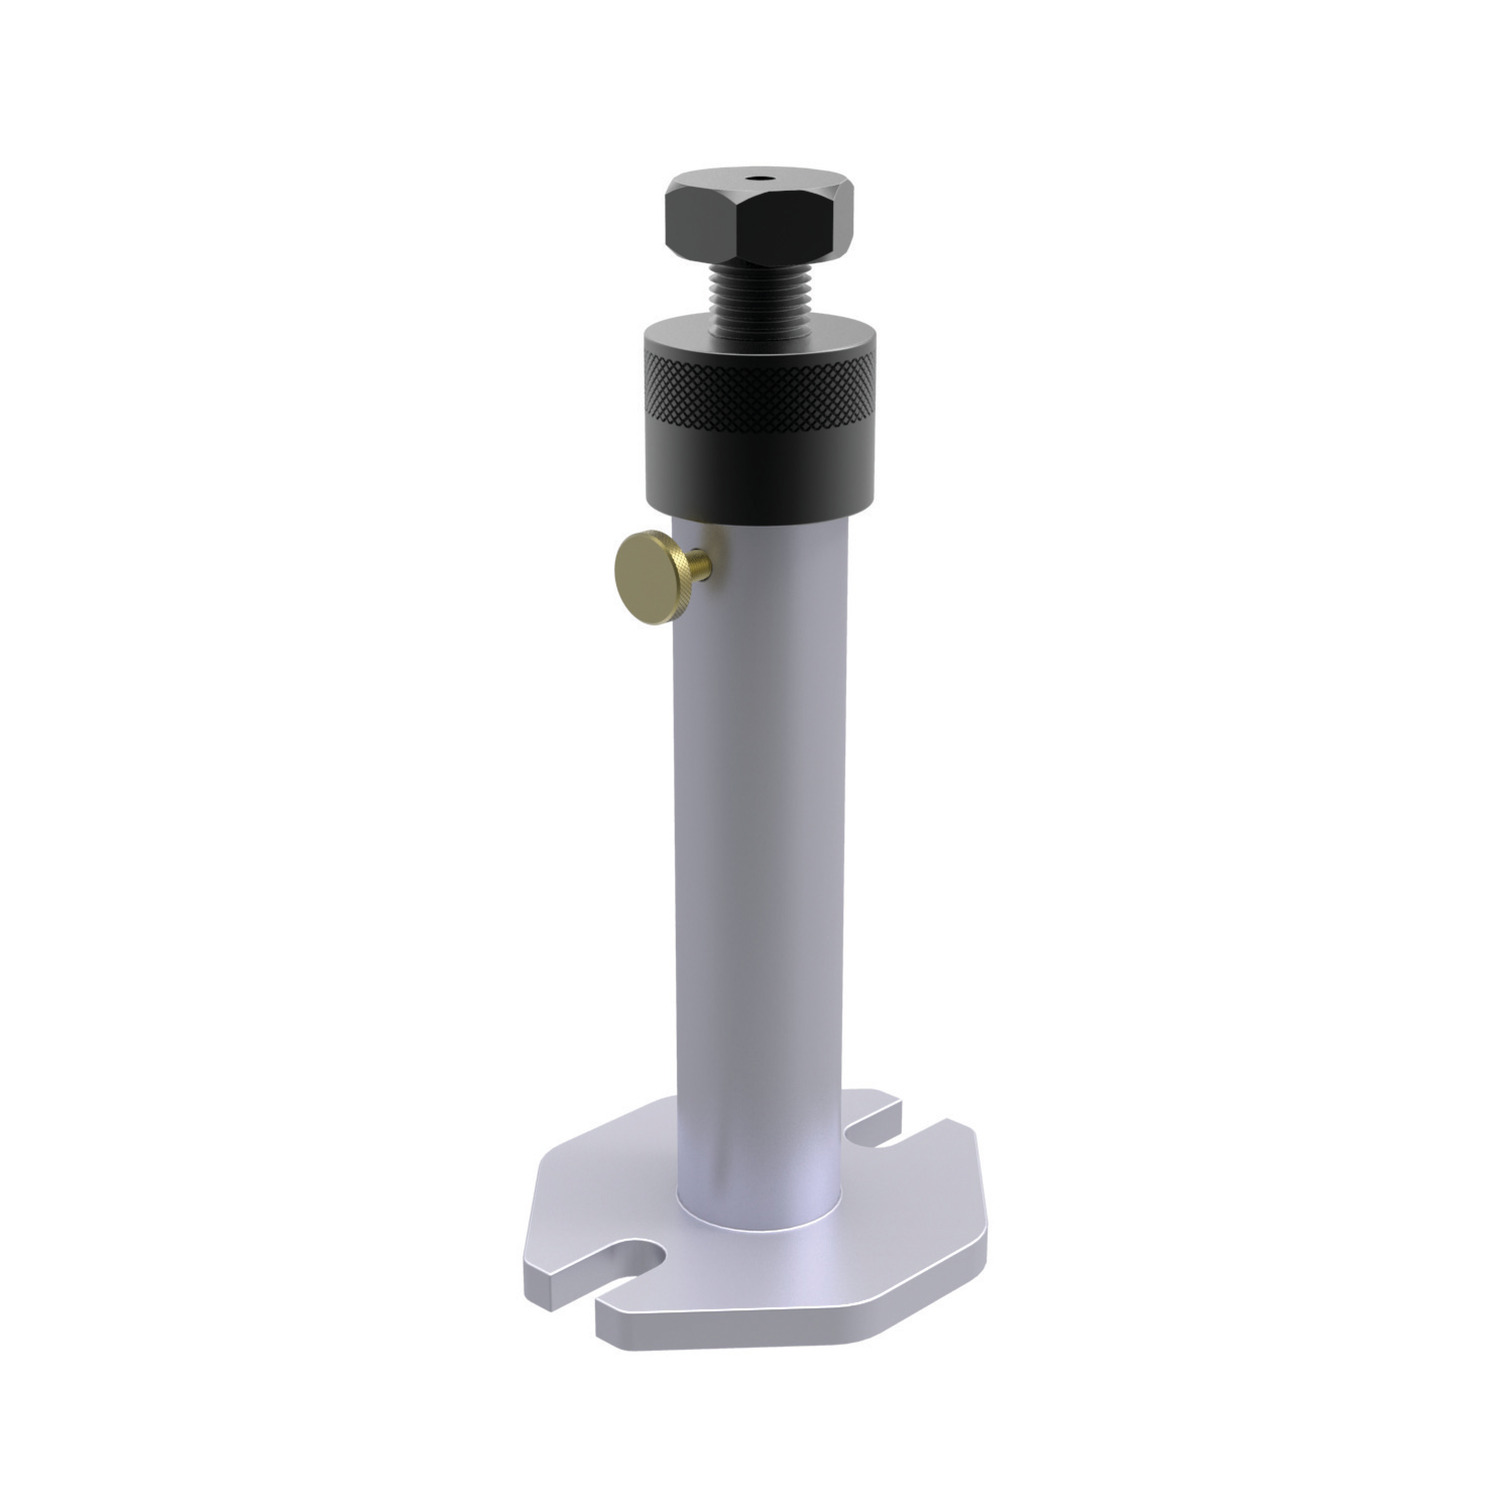 Support Stands This screw jack is designed for quick, stepless adjustment throughout its height range.